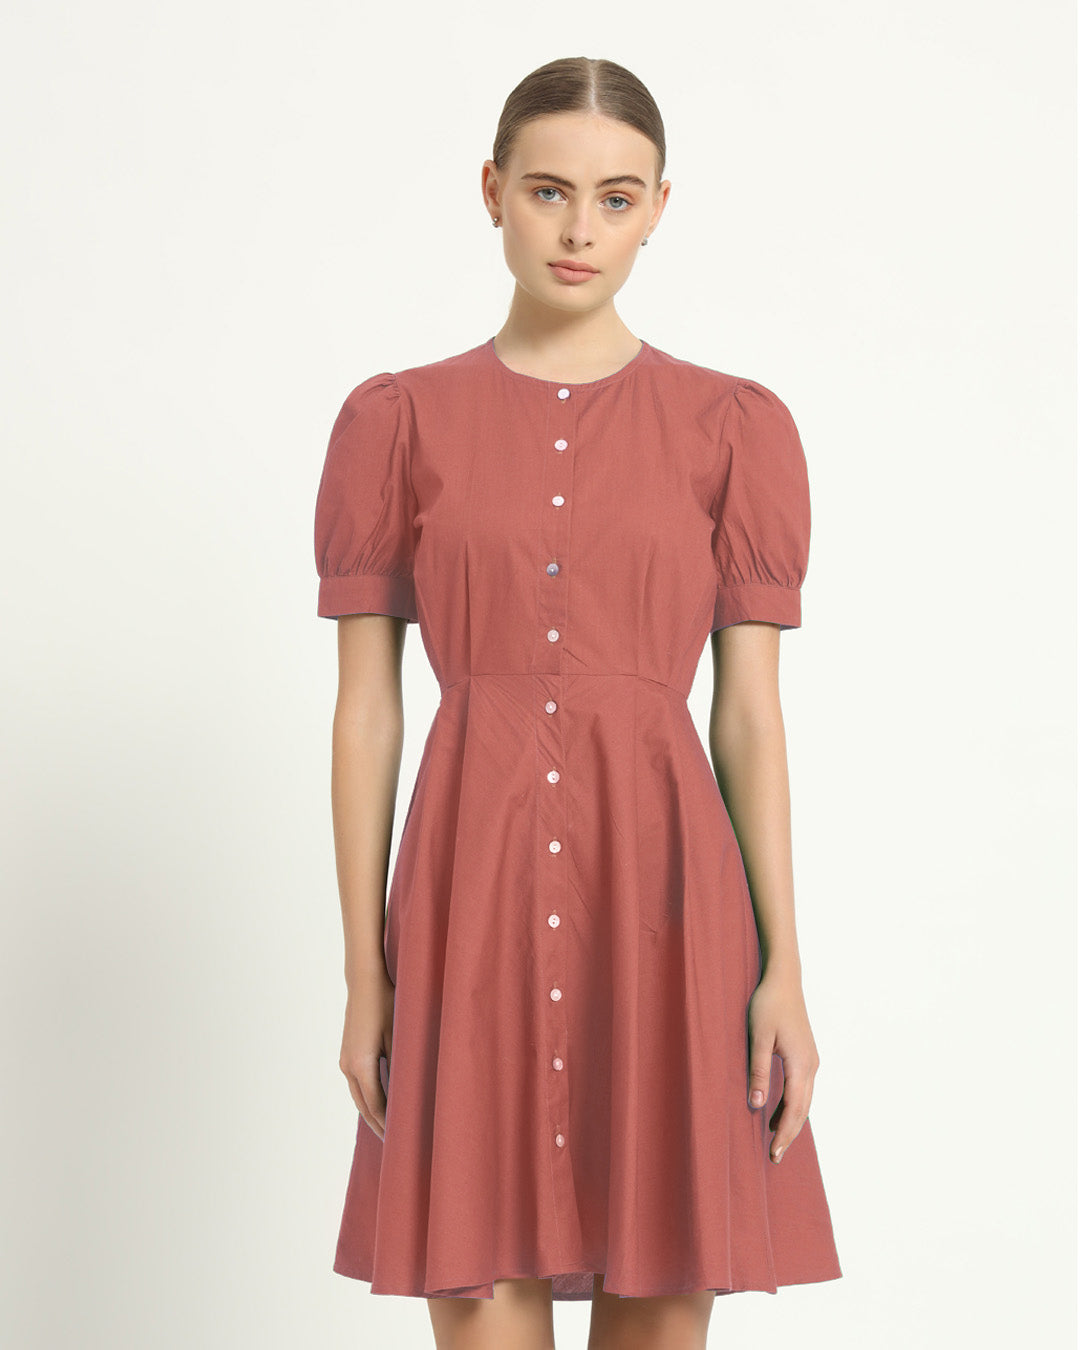 The Kittsee Ivory Pink Cotton Dress